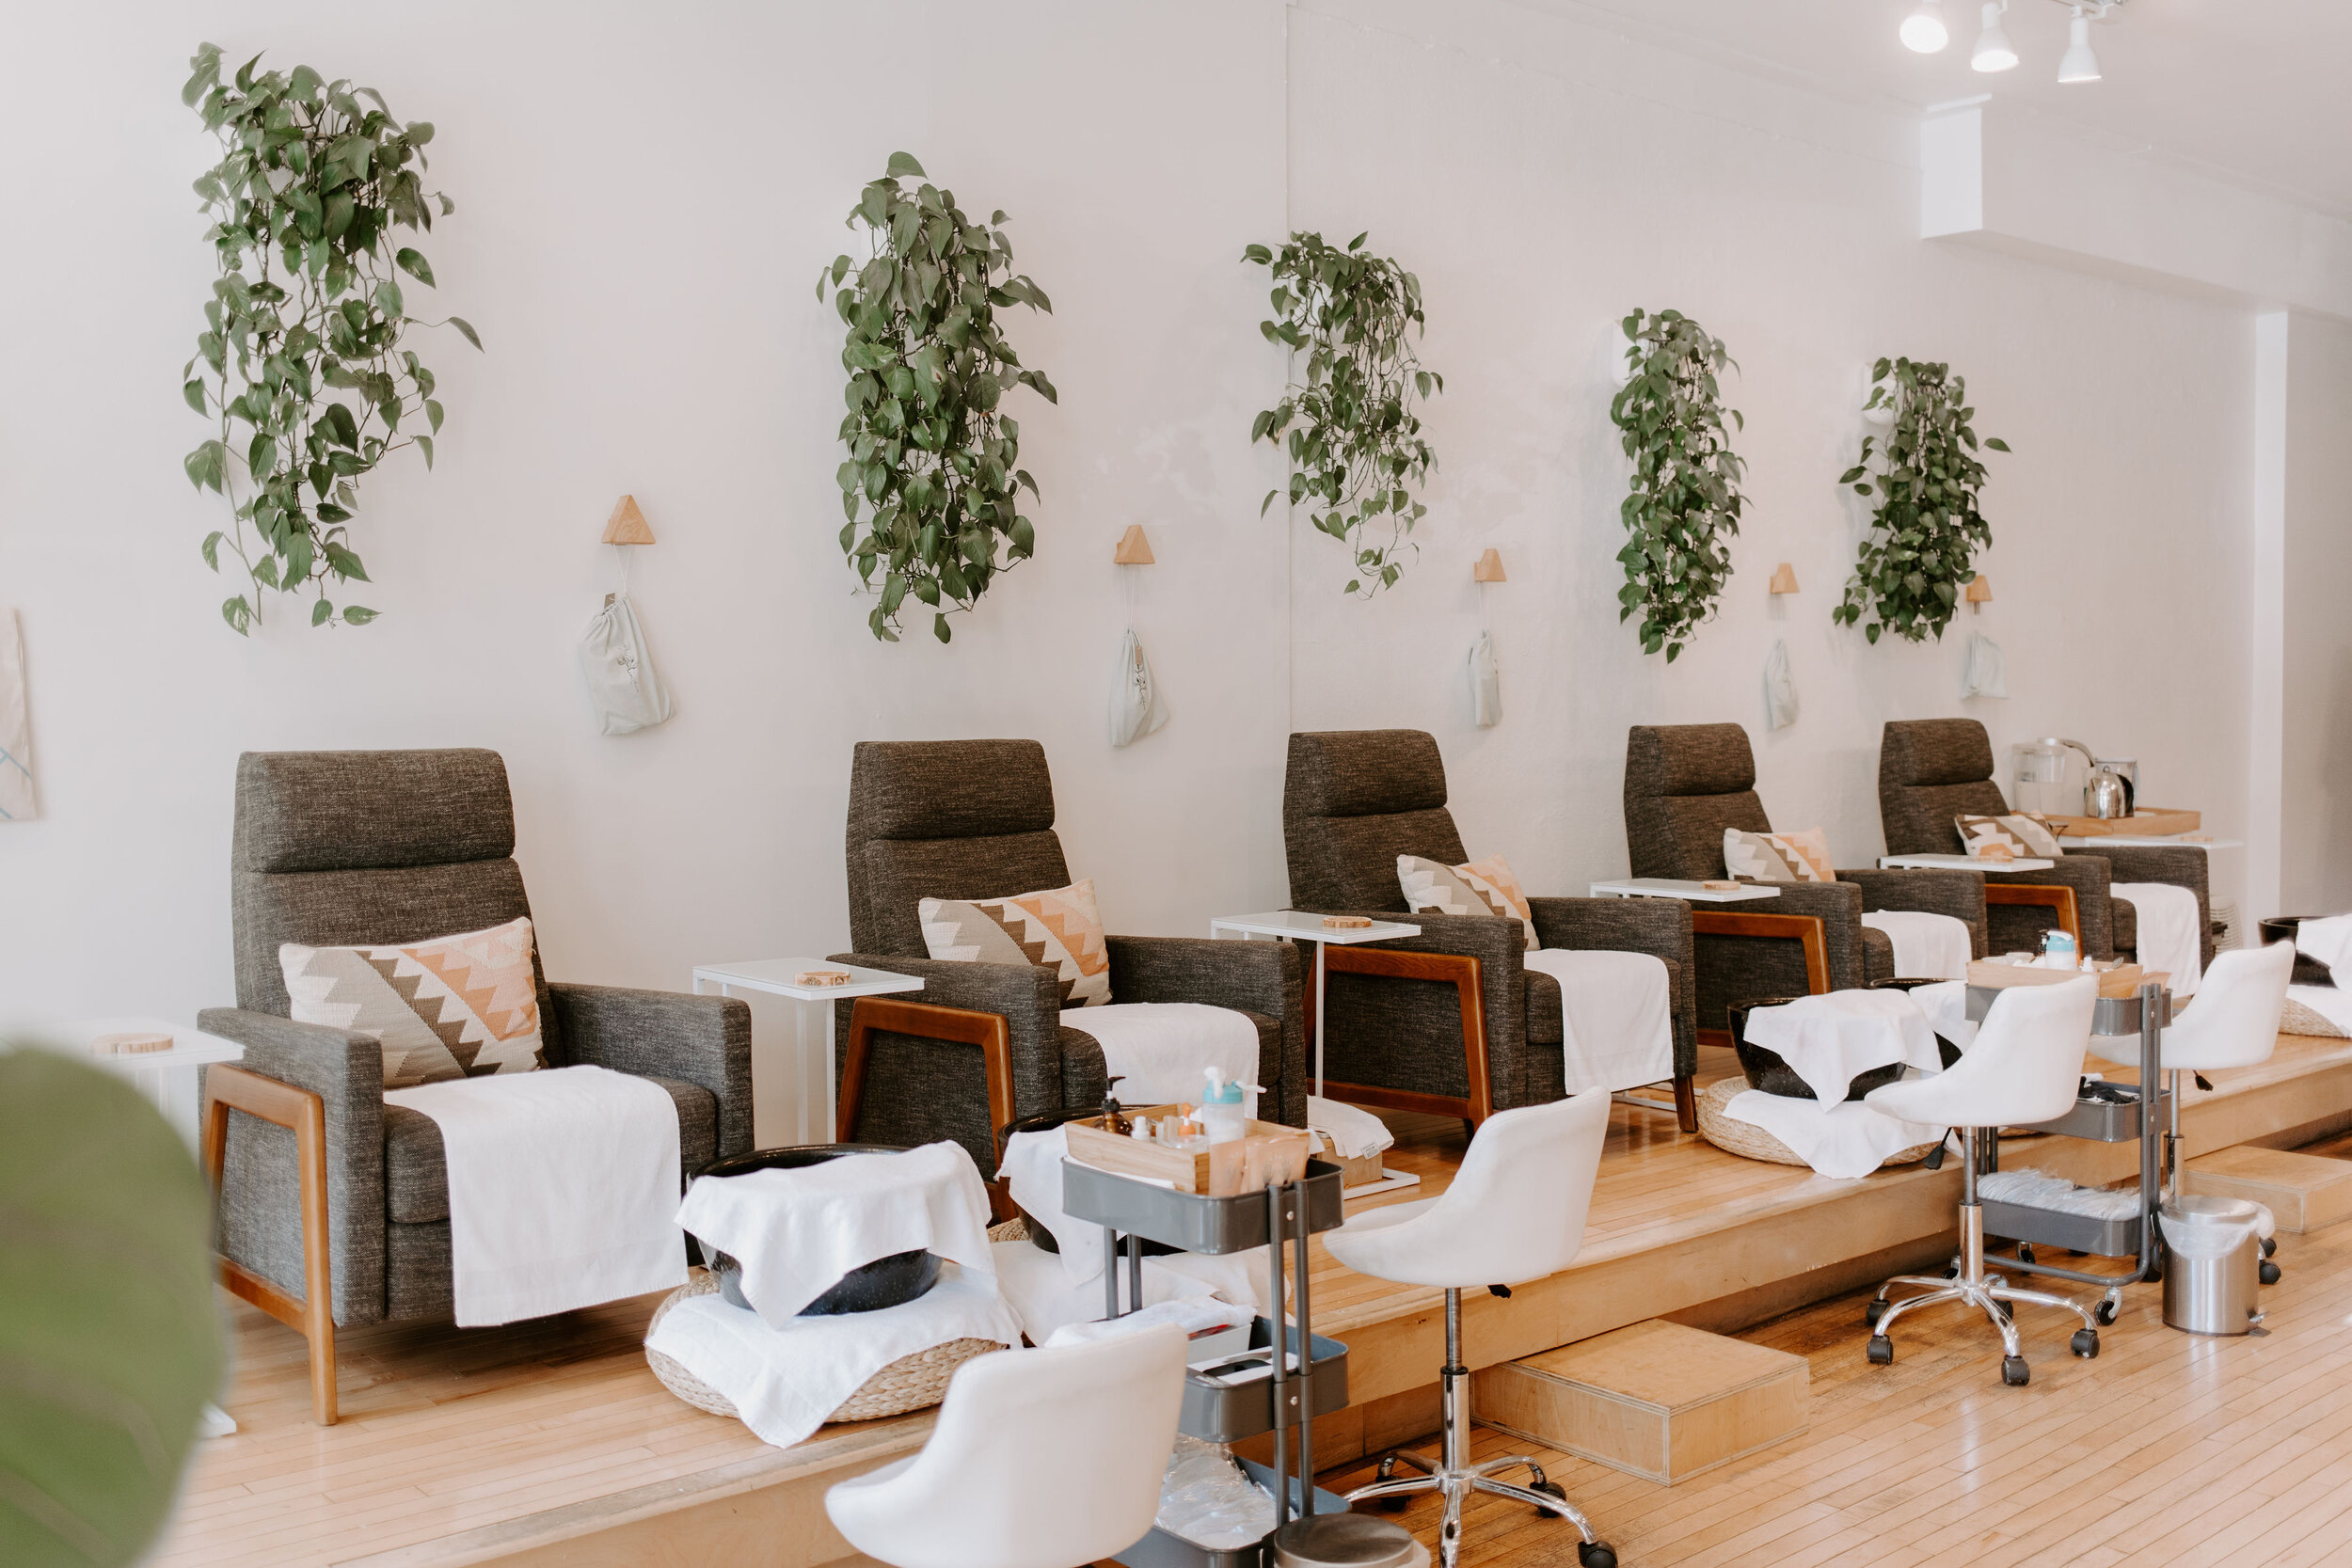 Nails Salons Near Me : How to Find Nail Salons Near Your Location Easily